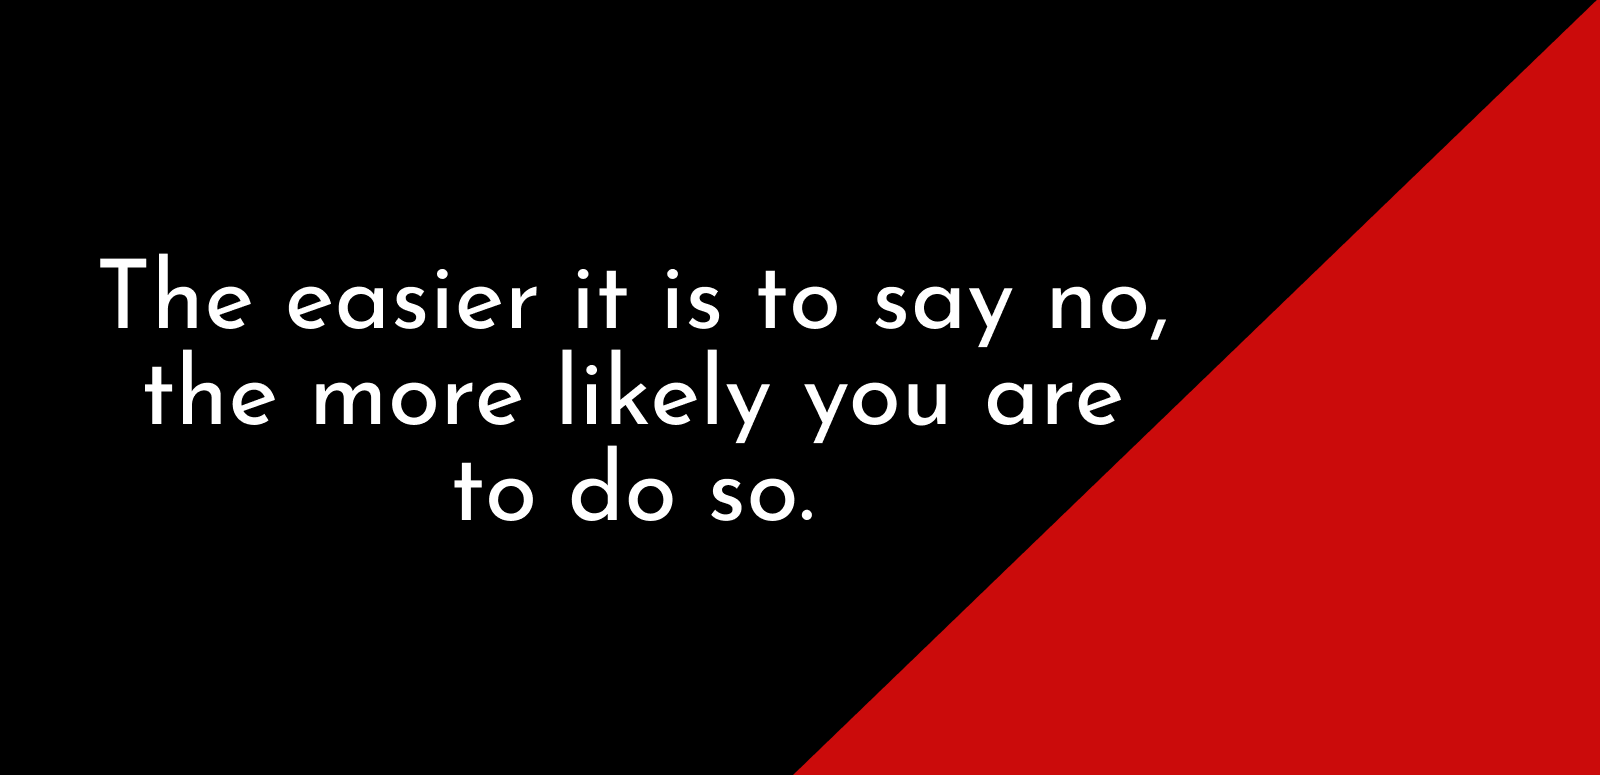 The easier it is to say no, the more likely you are to do so